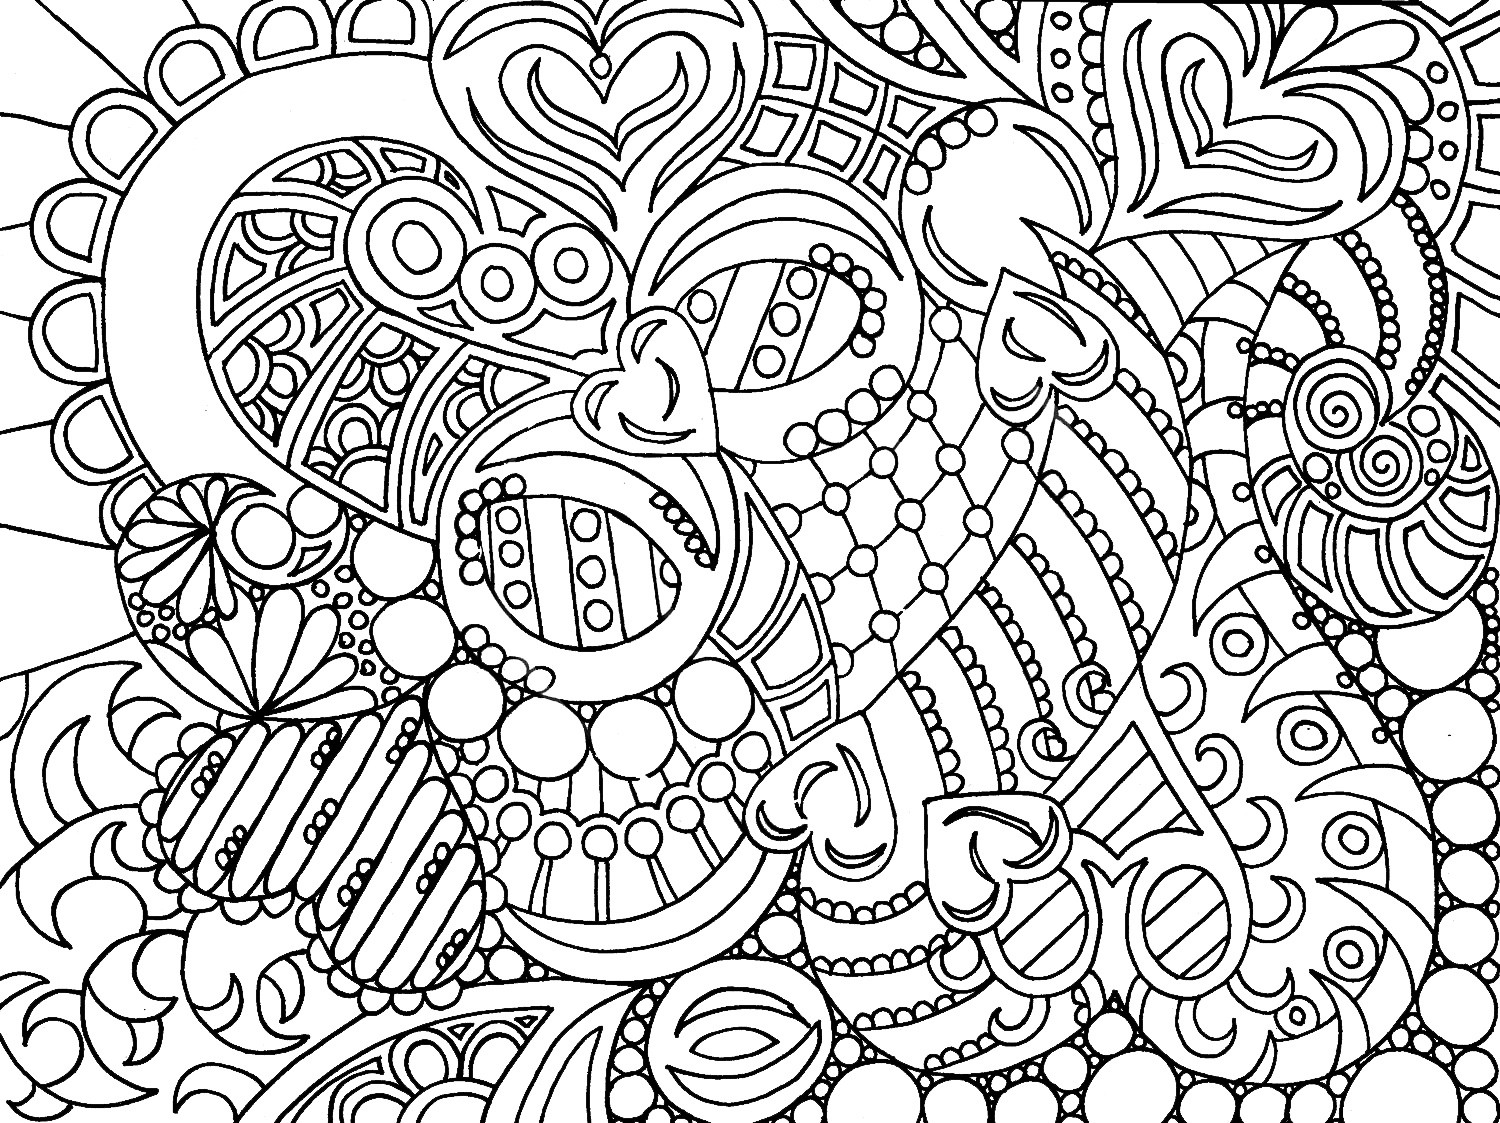 Coloring Sheets Free Printable
 Mindfulness Colouring Sheets Free Printable Printable